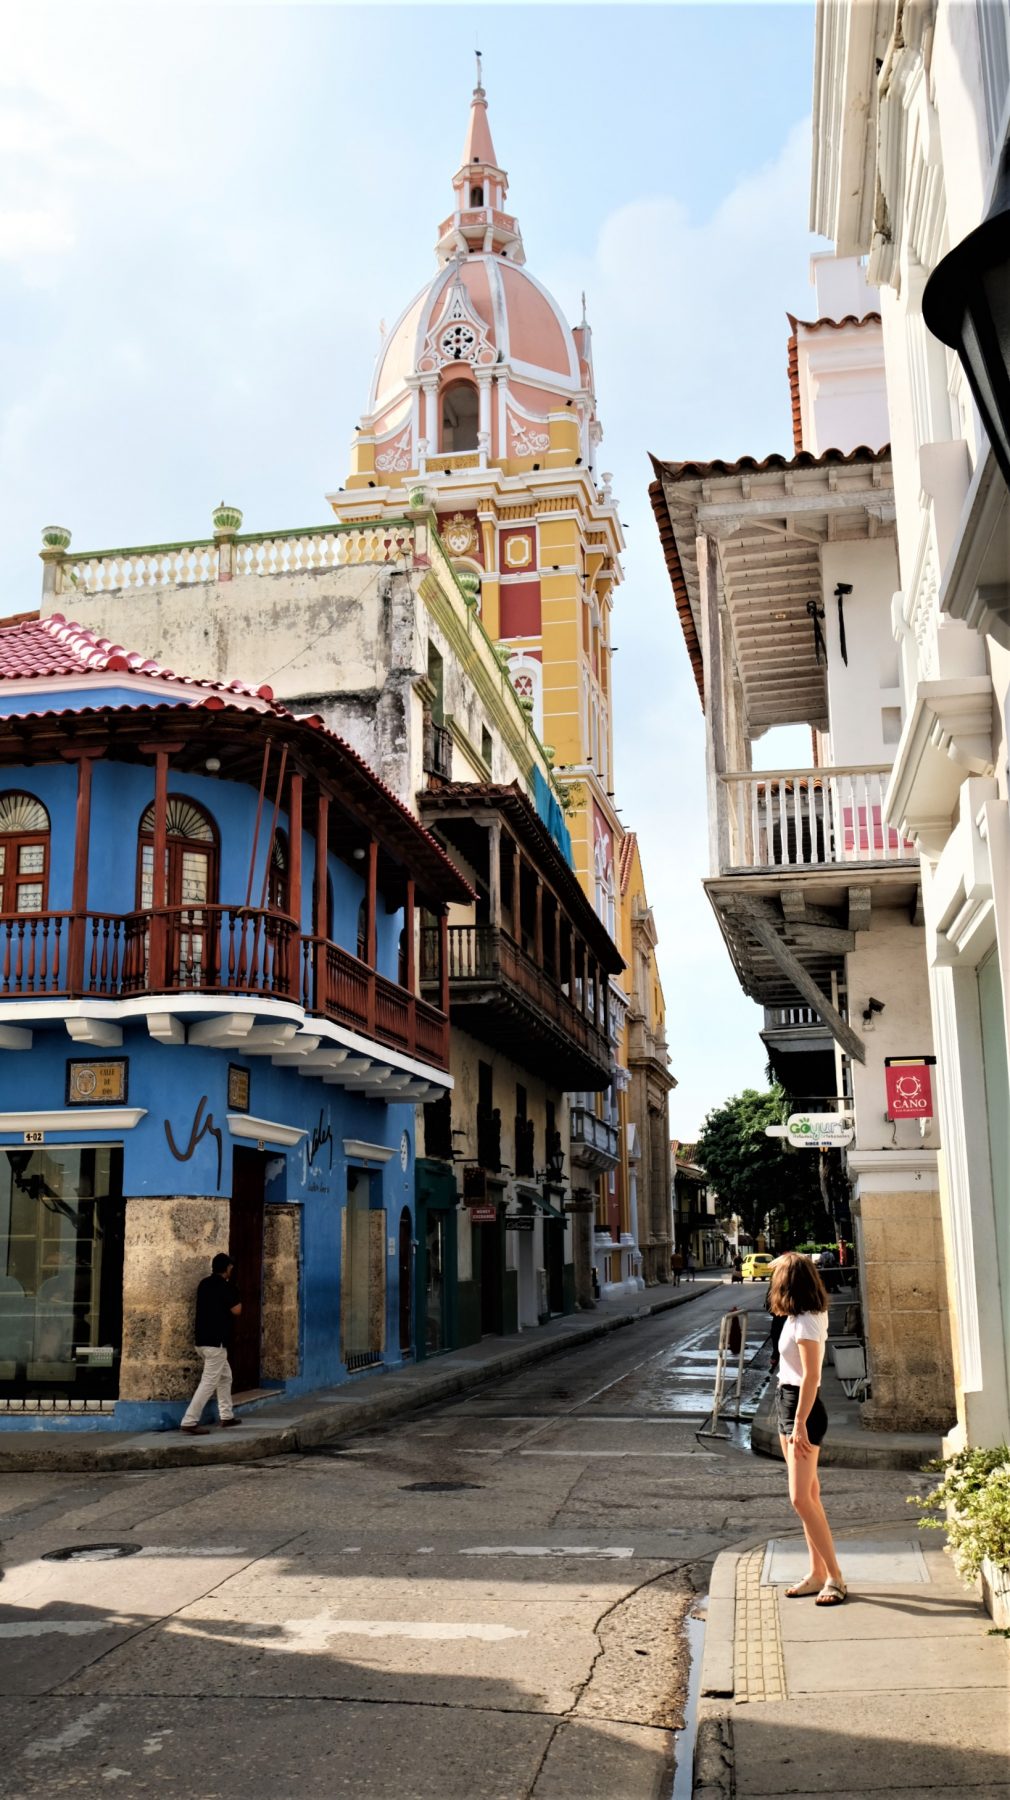 Cartagena Colombia Things To Do - Church Tower - Charlie on Travel